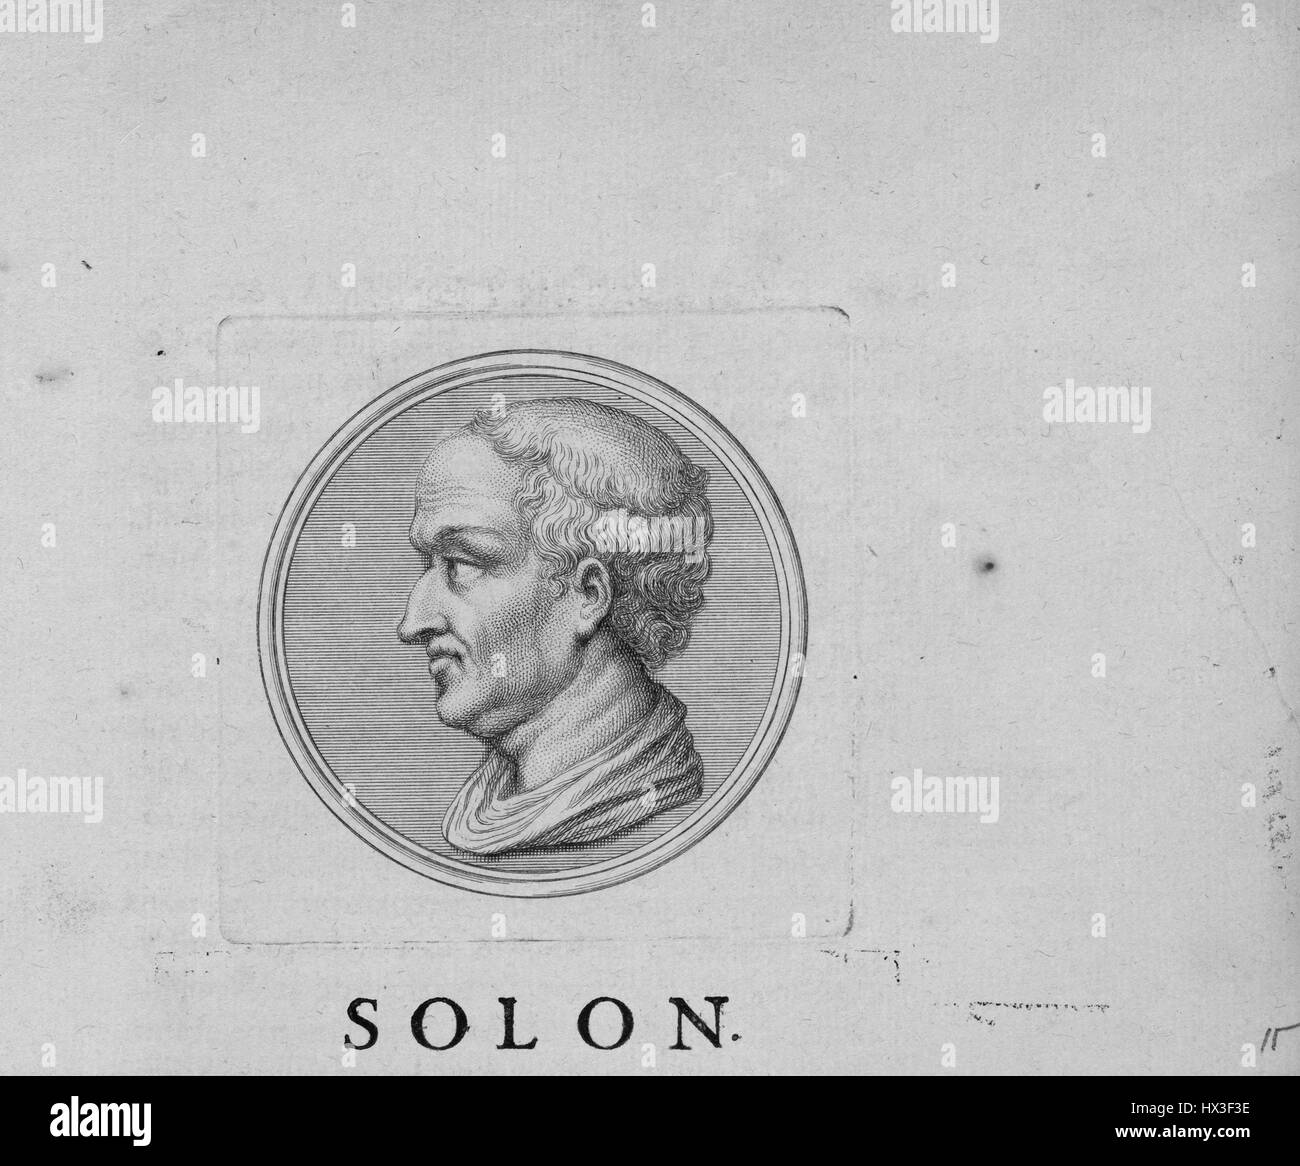 Portait of Solon, a prominent Greek statesman and poet, in profile, 1809. From the New York Public Library. Stock Photo